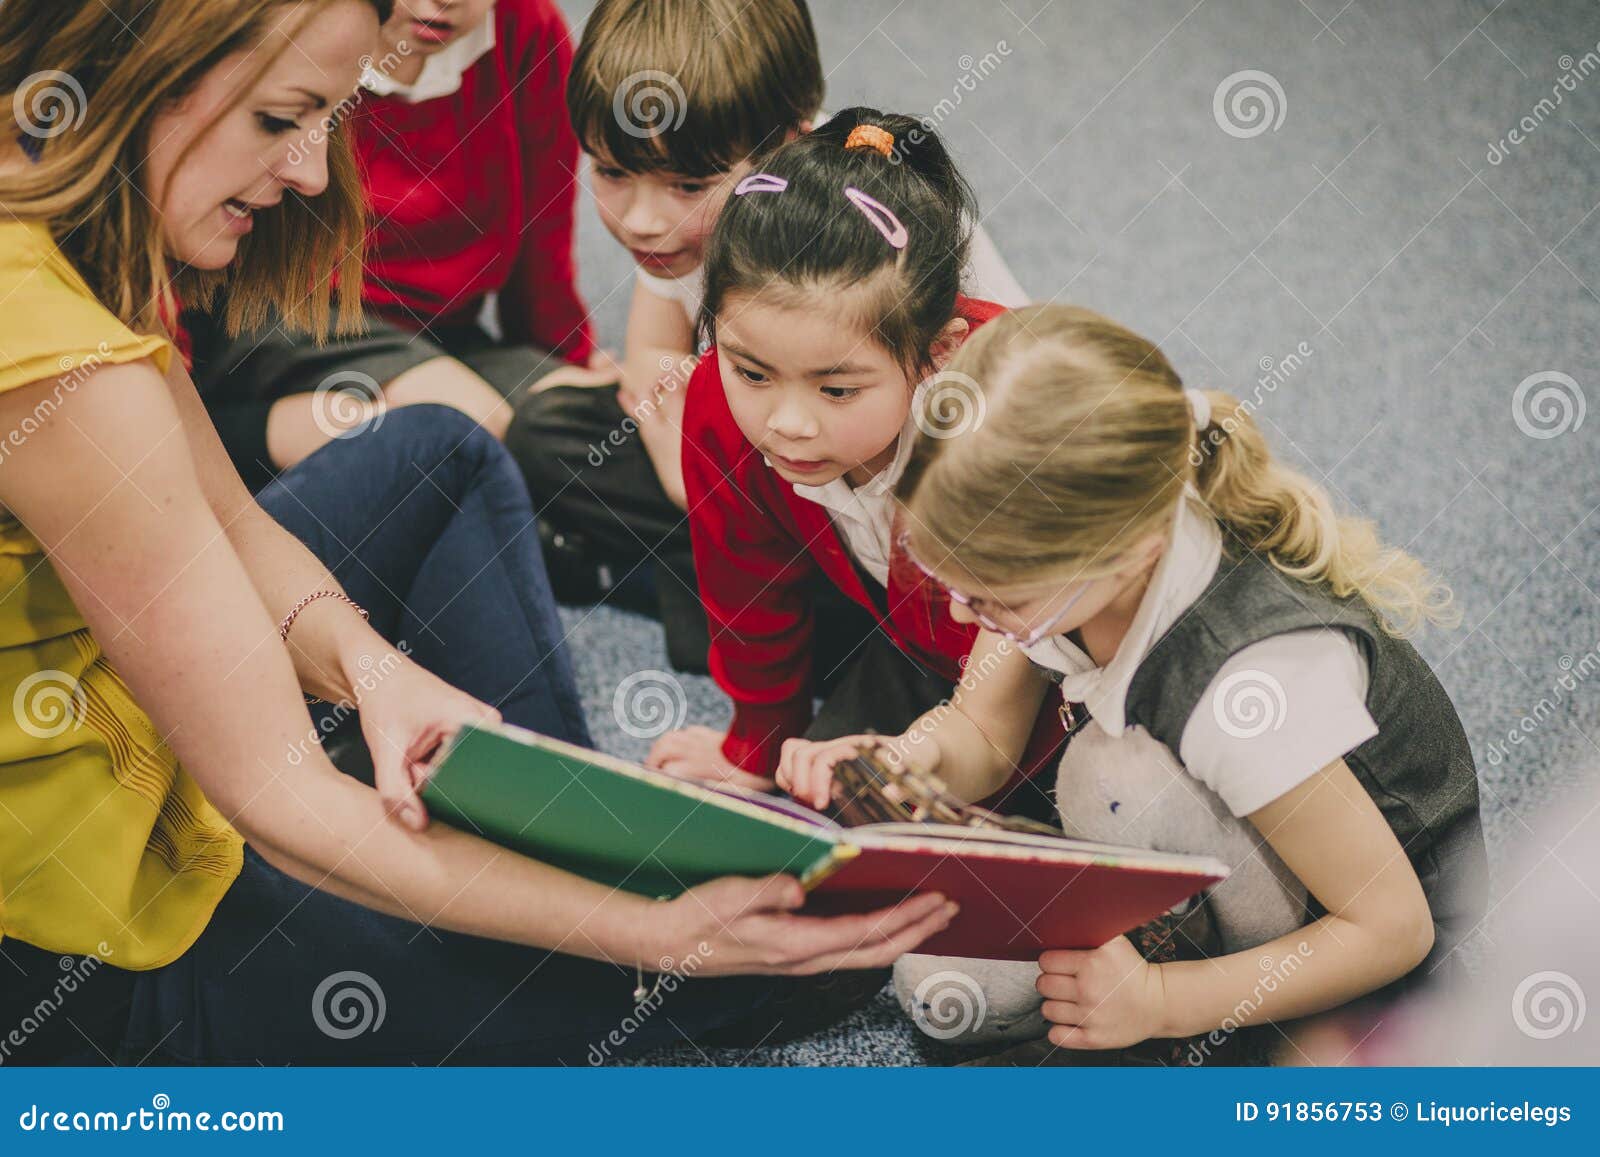 storytime in the classroom